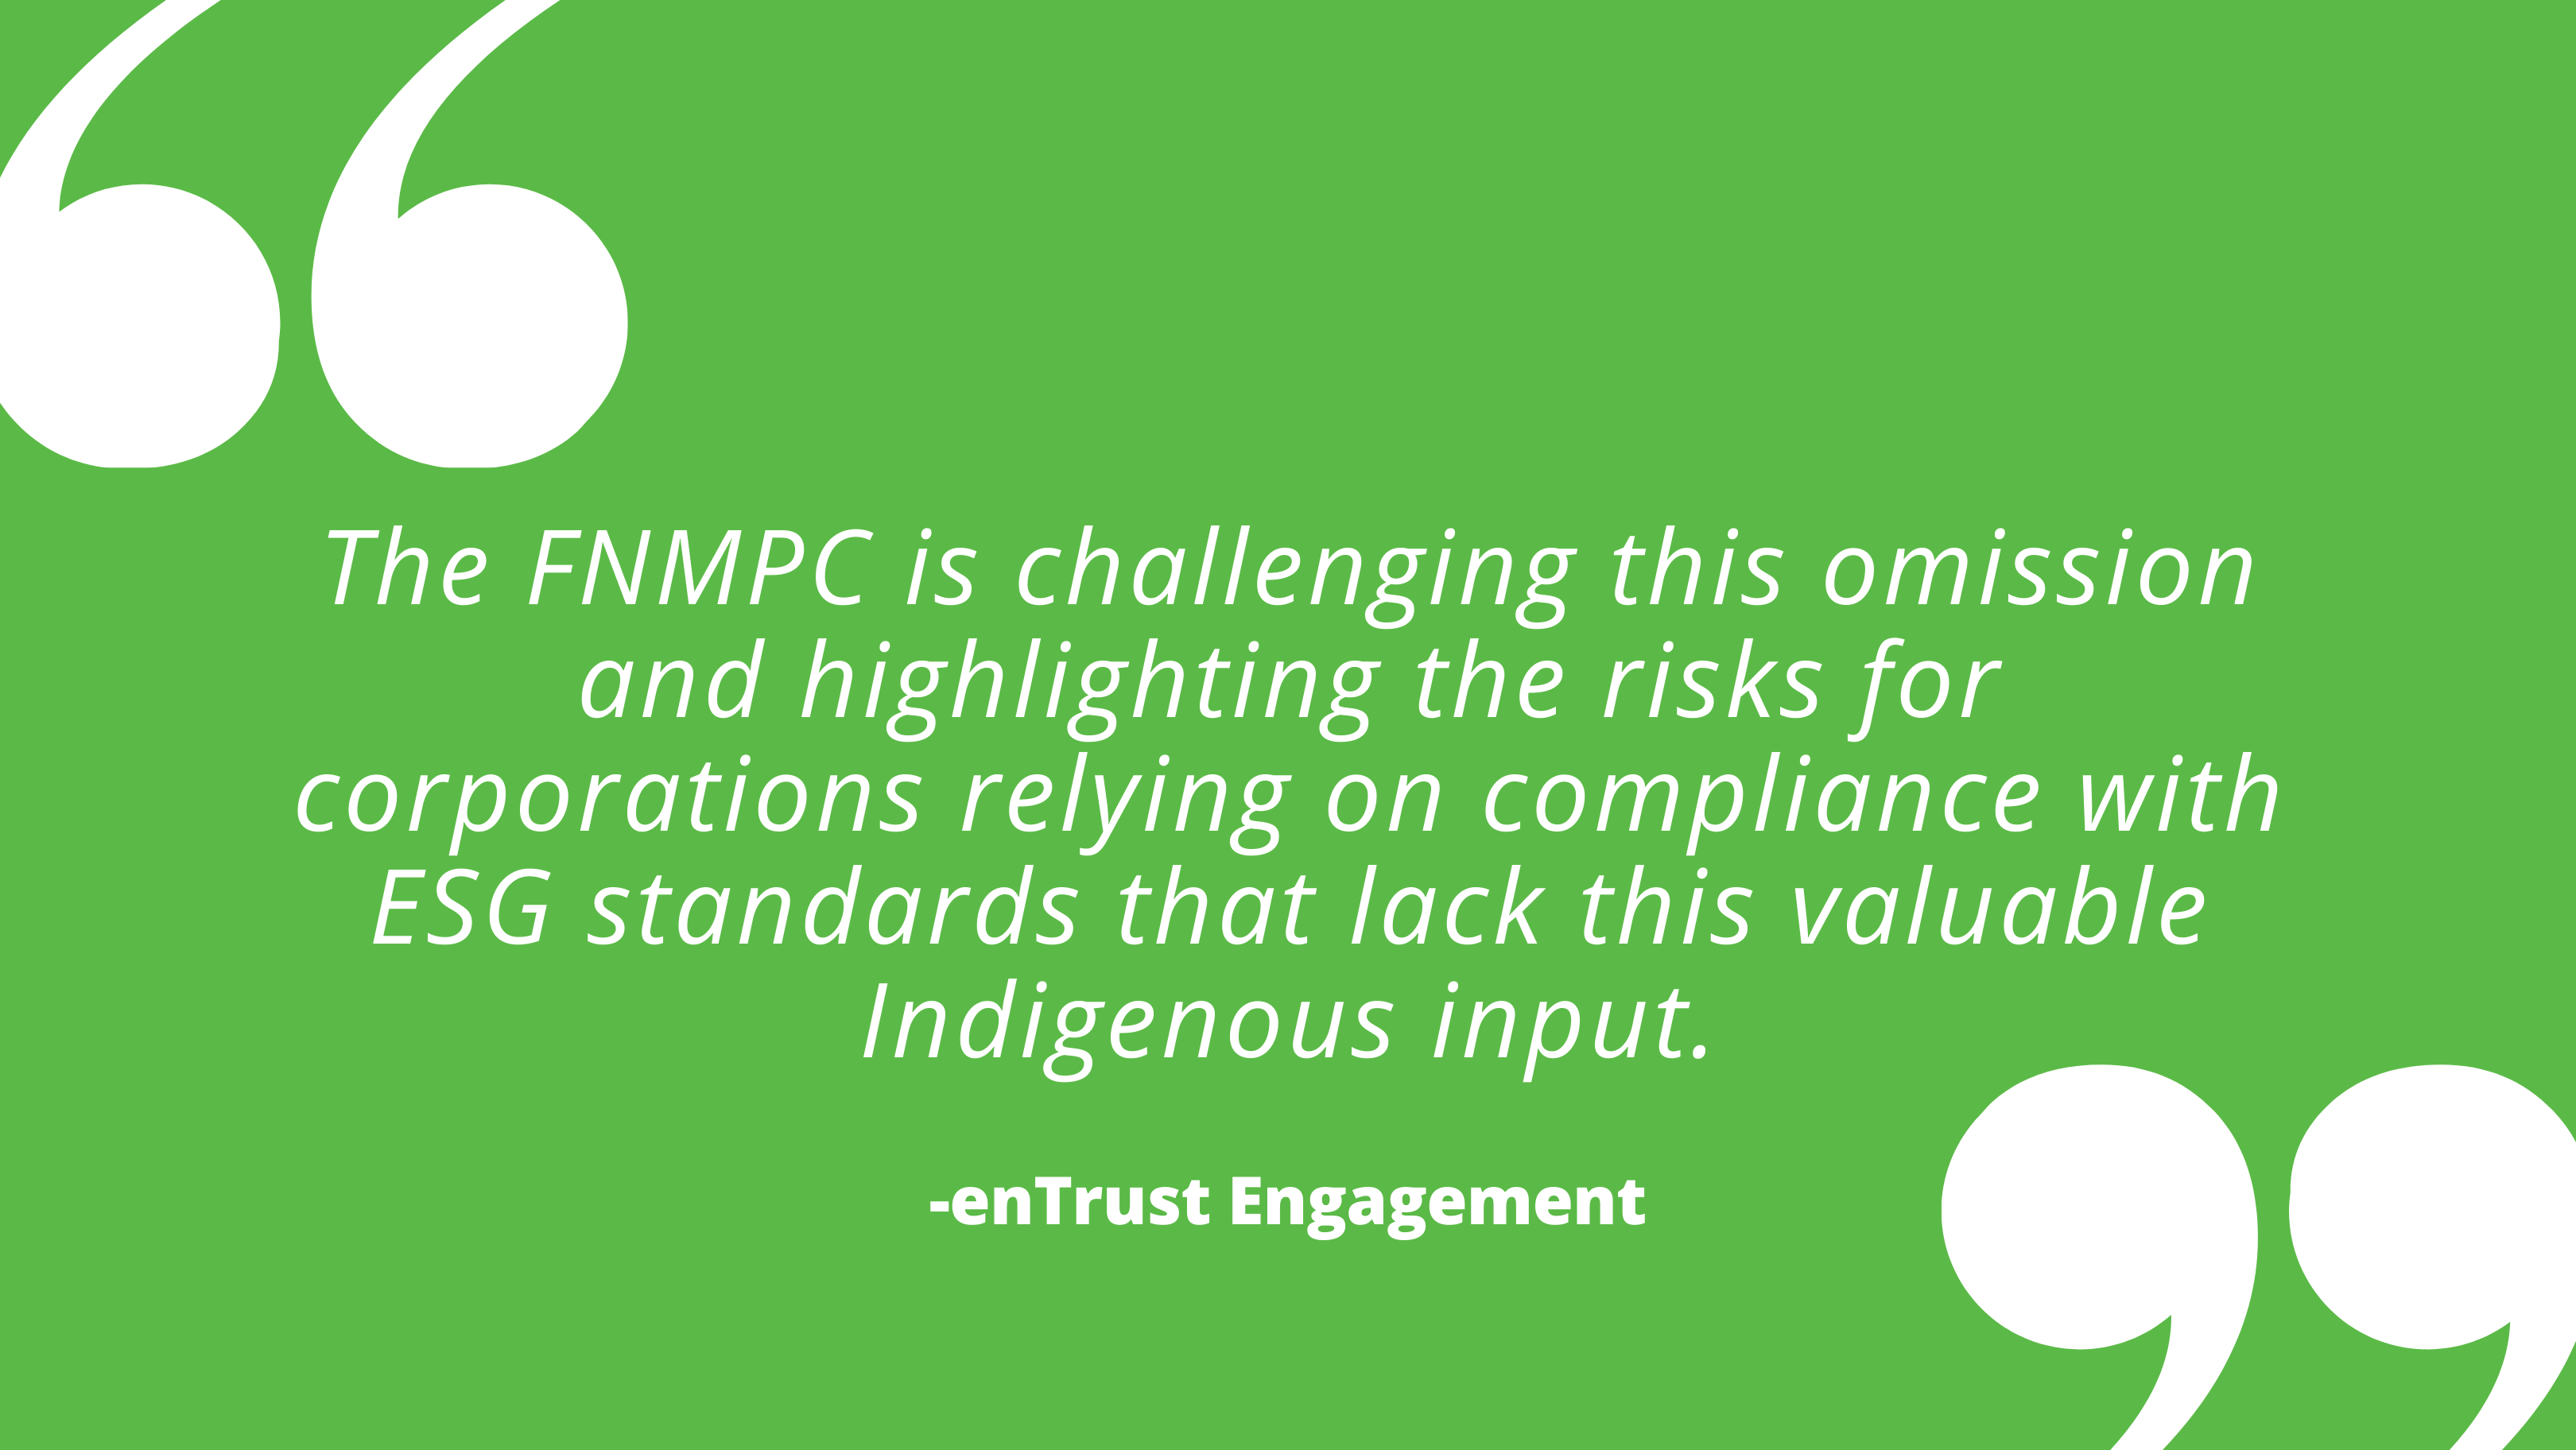 The FNMPC is challenging this omission and highlighting the risks for corporations relying on compliance with ESG standards that lack this valuable Indigenous input.